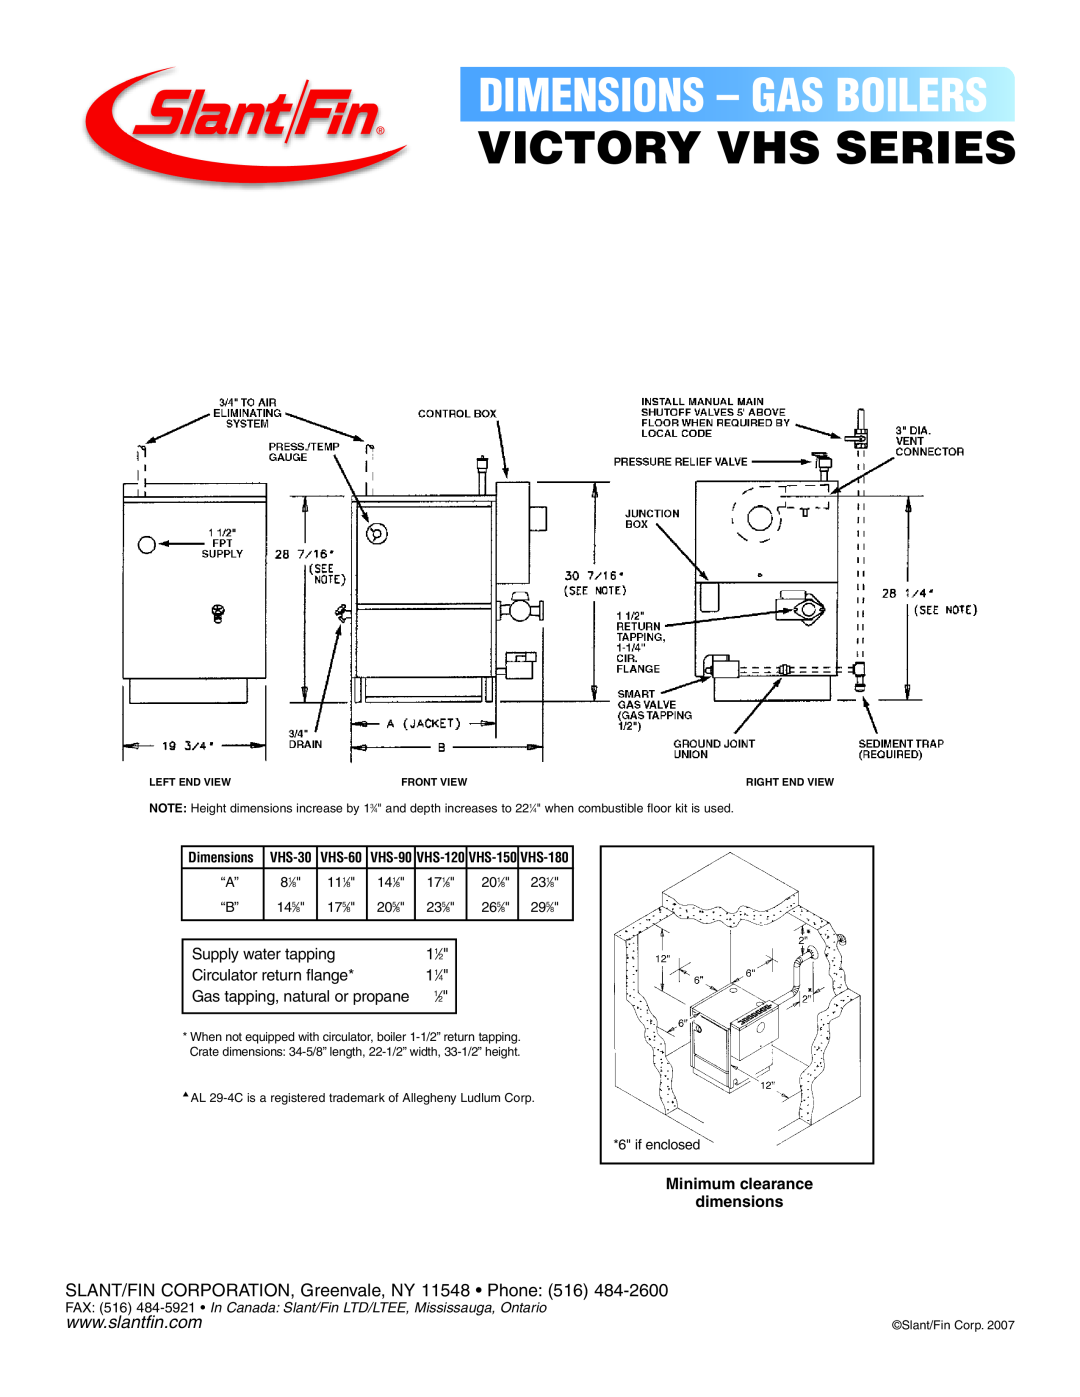 Slant/Fin VHS SERIES dimensions Victory Vhs Series, Dimensions - Gas Boilers, Supply water tapping, 11⁄2, 11⁄4, 201⁄8 